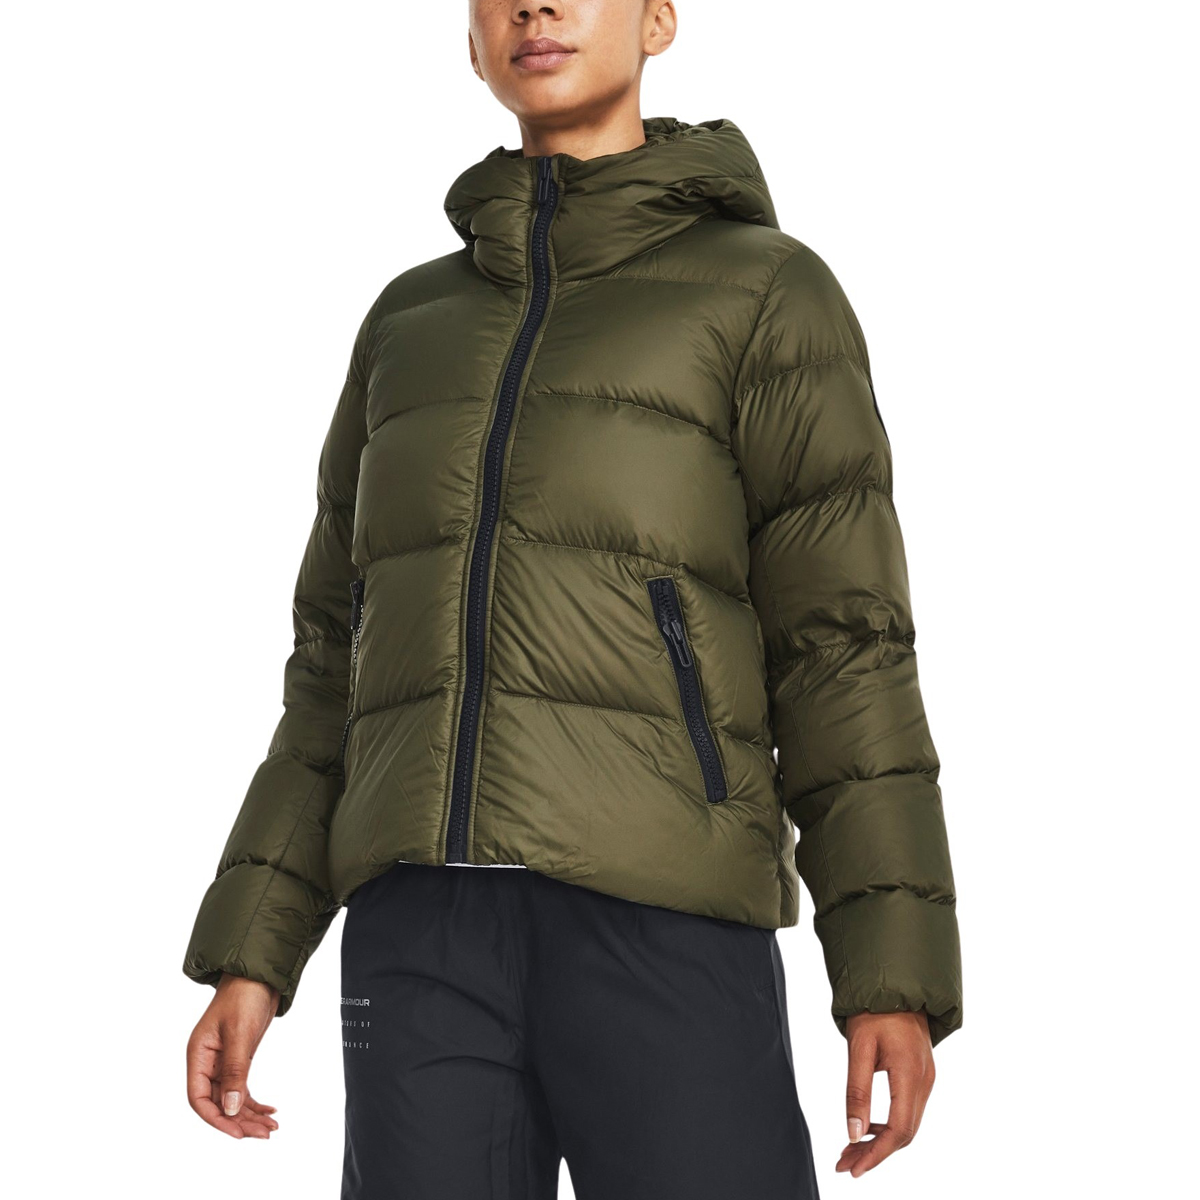 Women's Arctic Bomber Jacket - The North Face | Latulippe